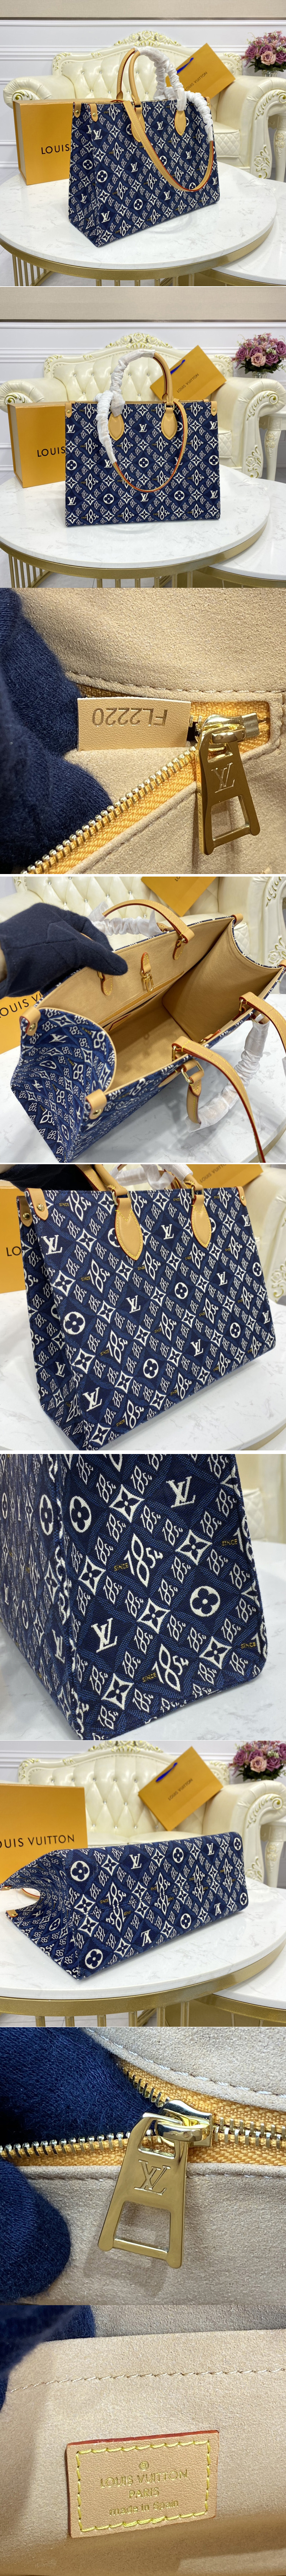 Replica Louis Vuitton M57396 LV OnTheGo GM tote bag in Blue Jacquard Since 1854 textile